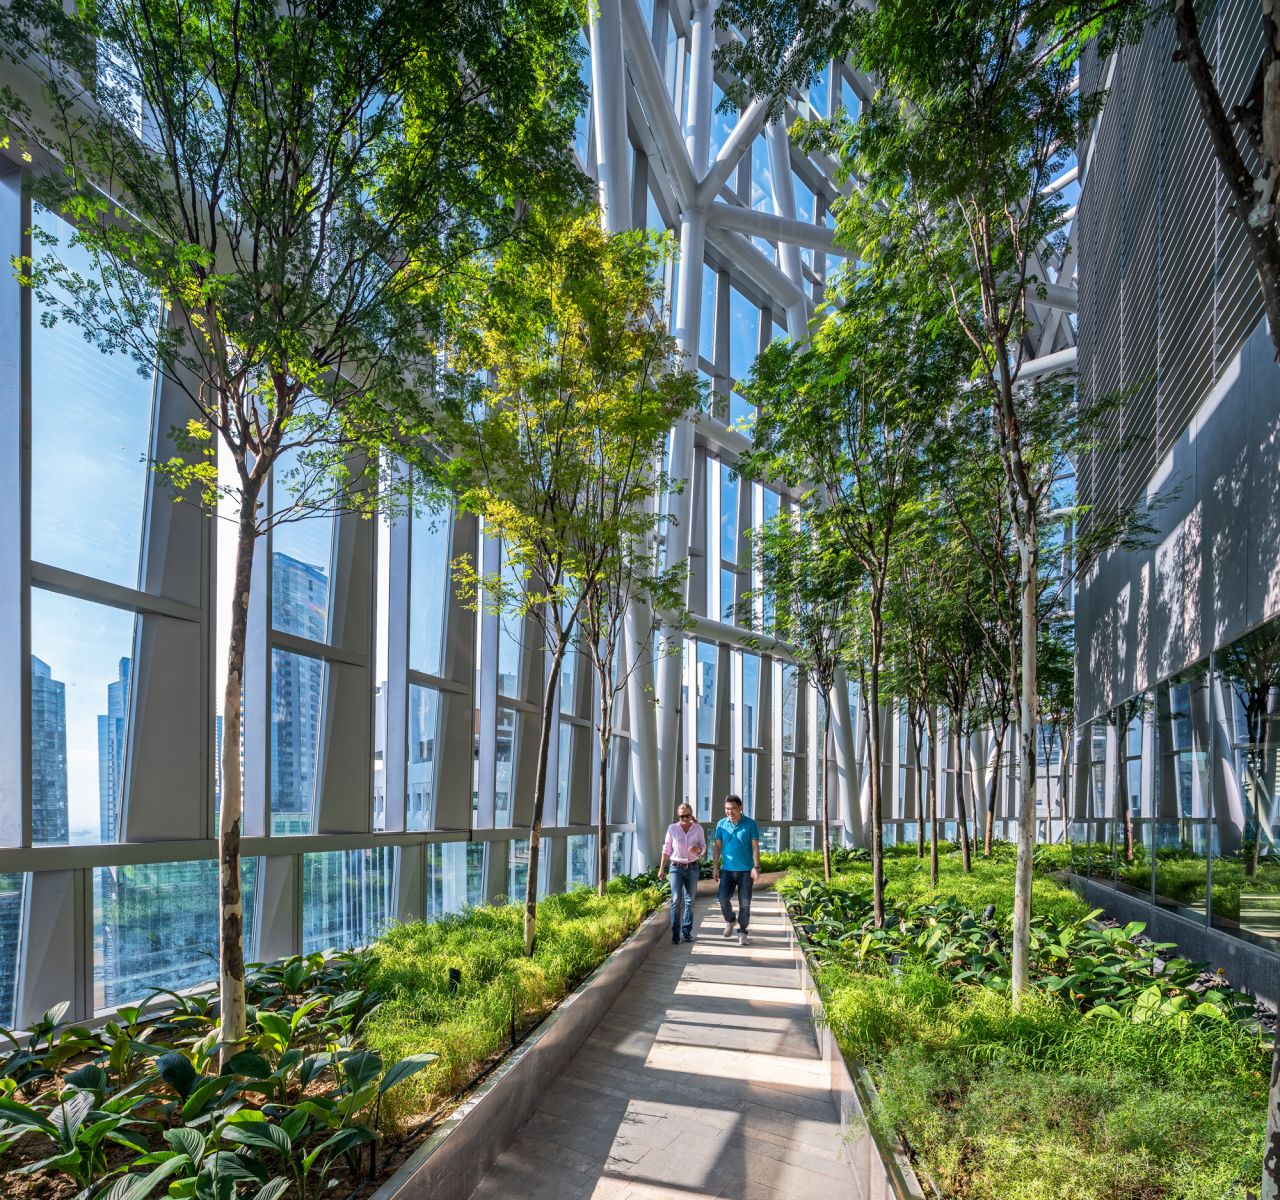 Singapore's Landscape Replacement Policy requires that developers replace any greenery lost with equal amounts of publicly accessible green space. 